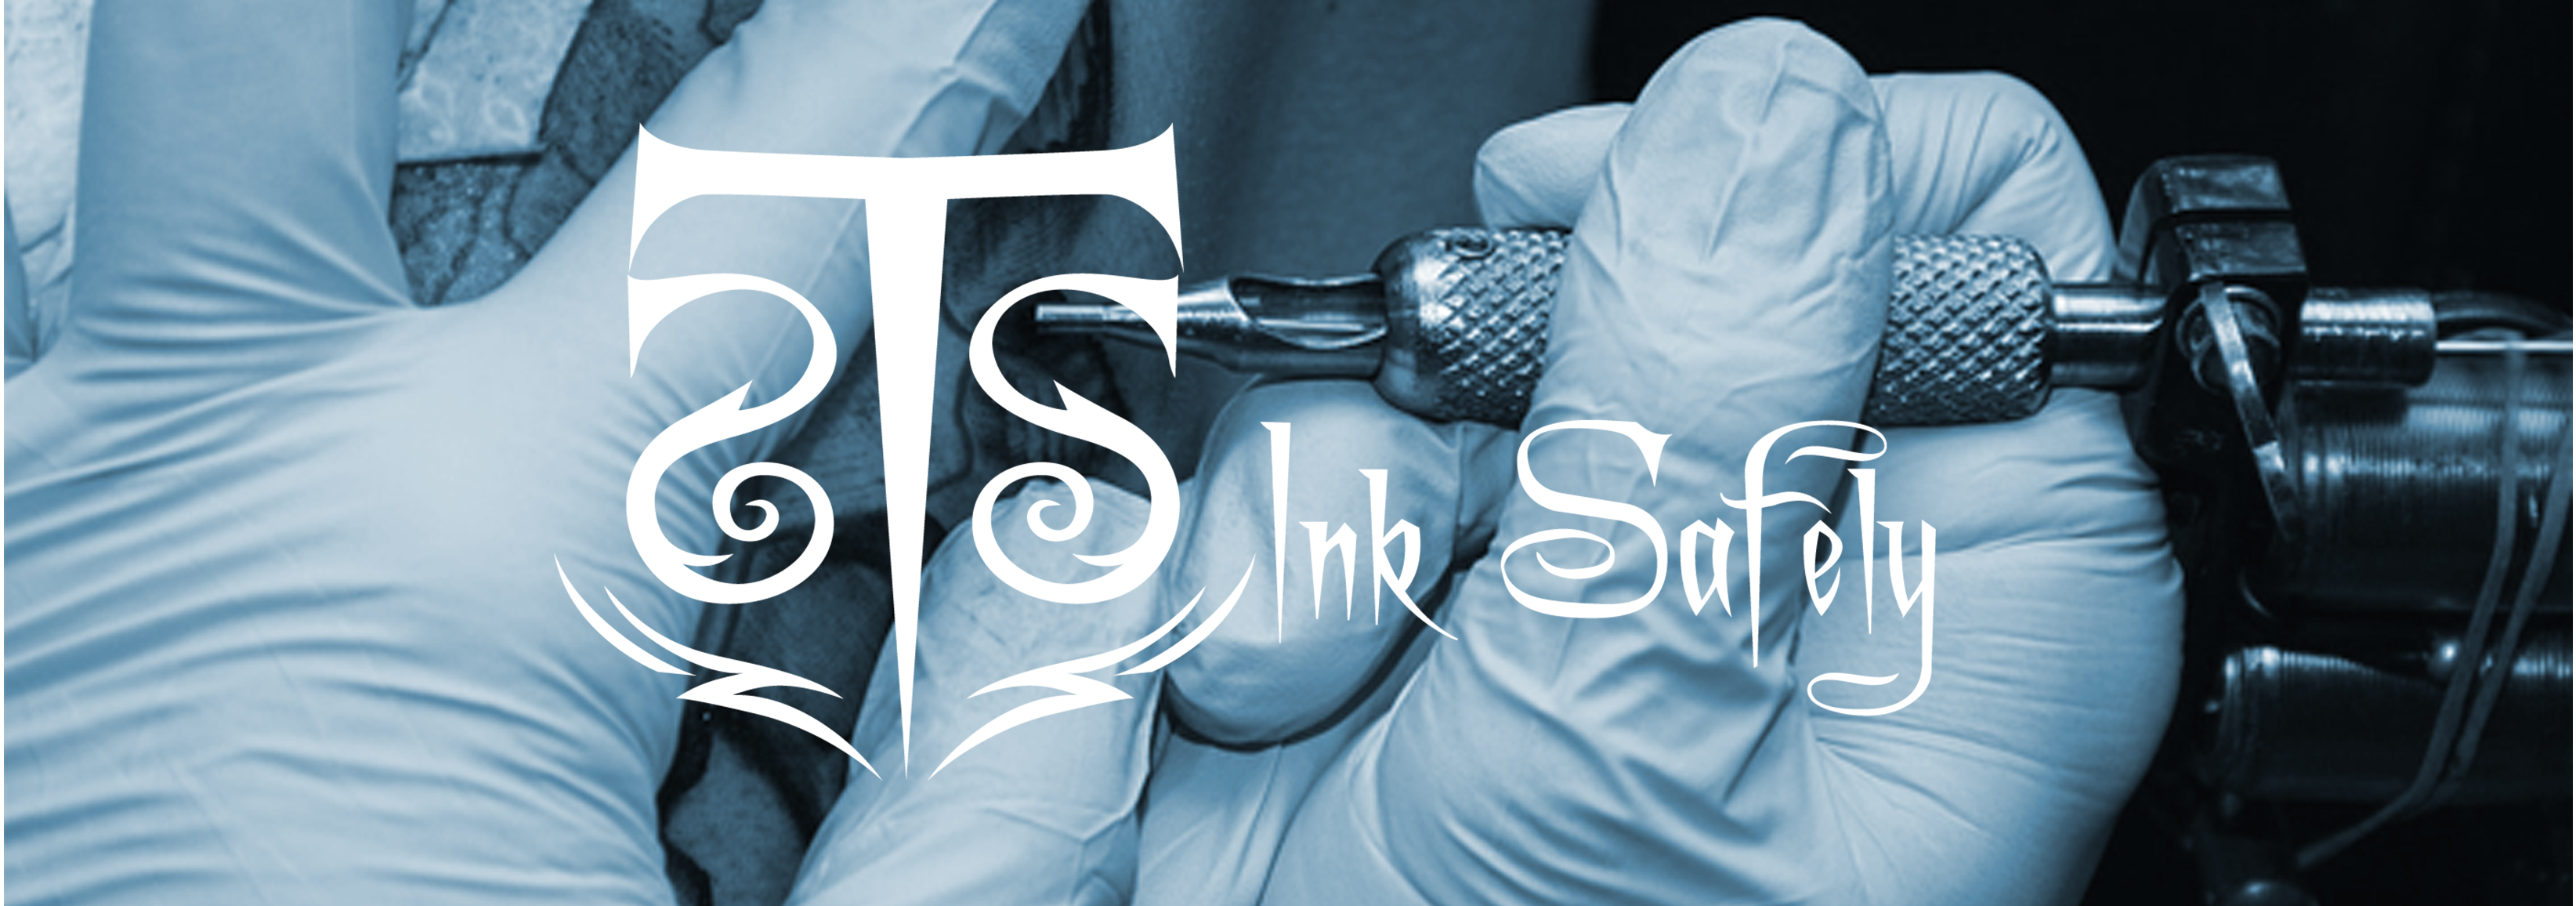 STS - Sustainable Tattoo Solutions